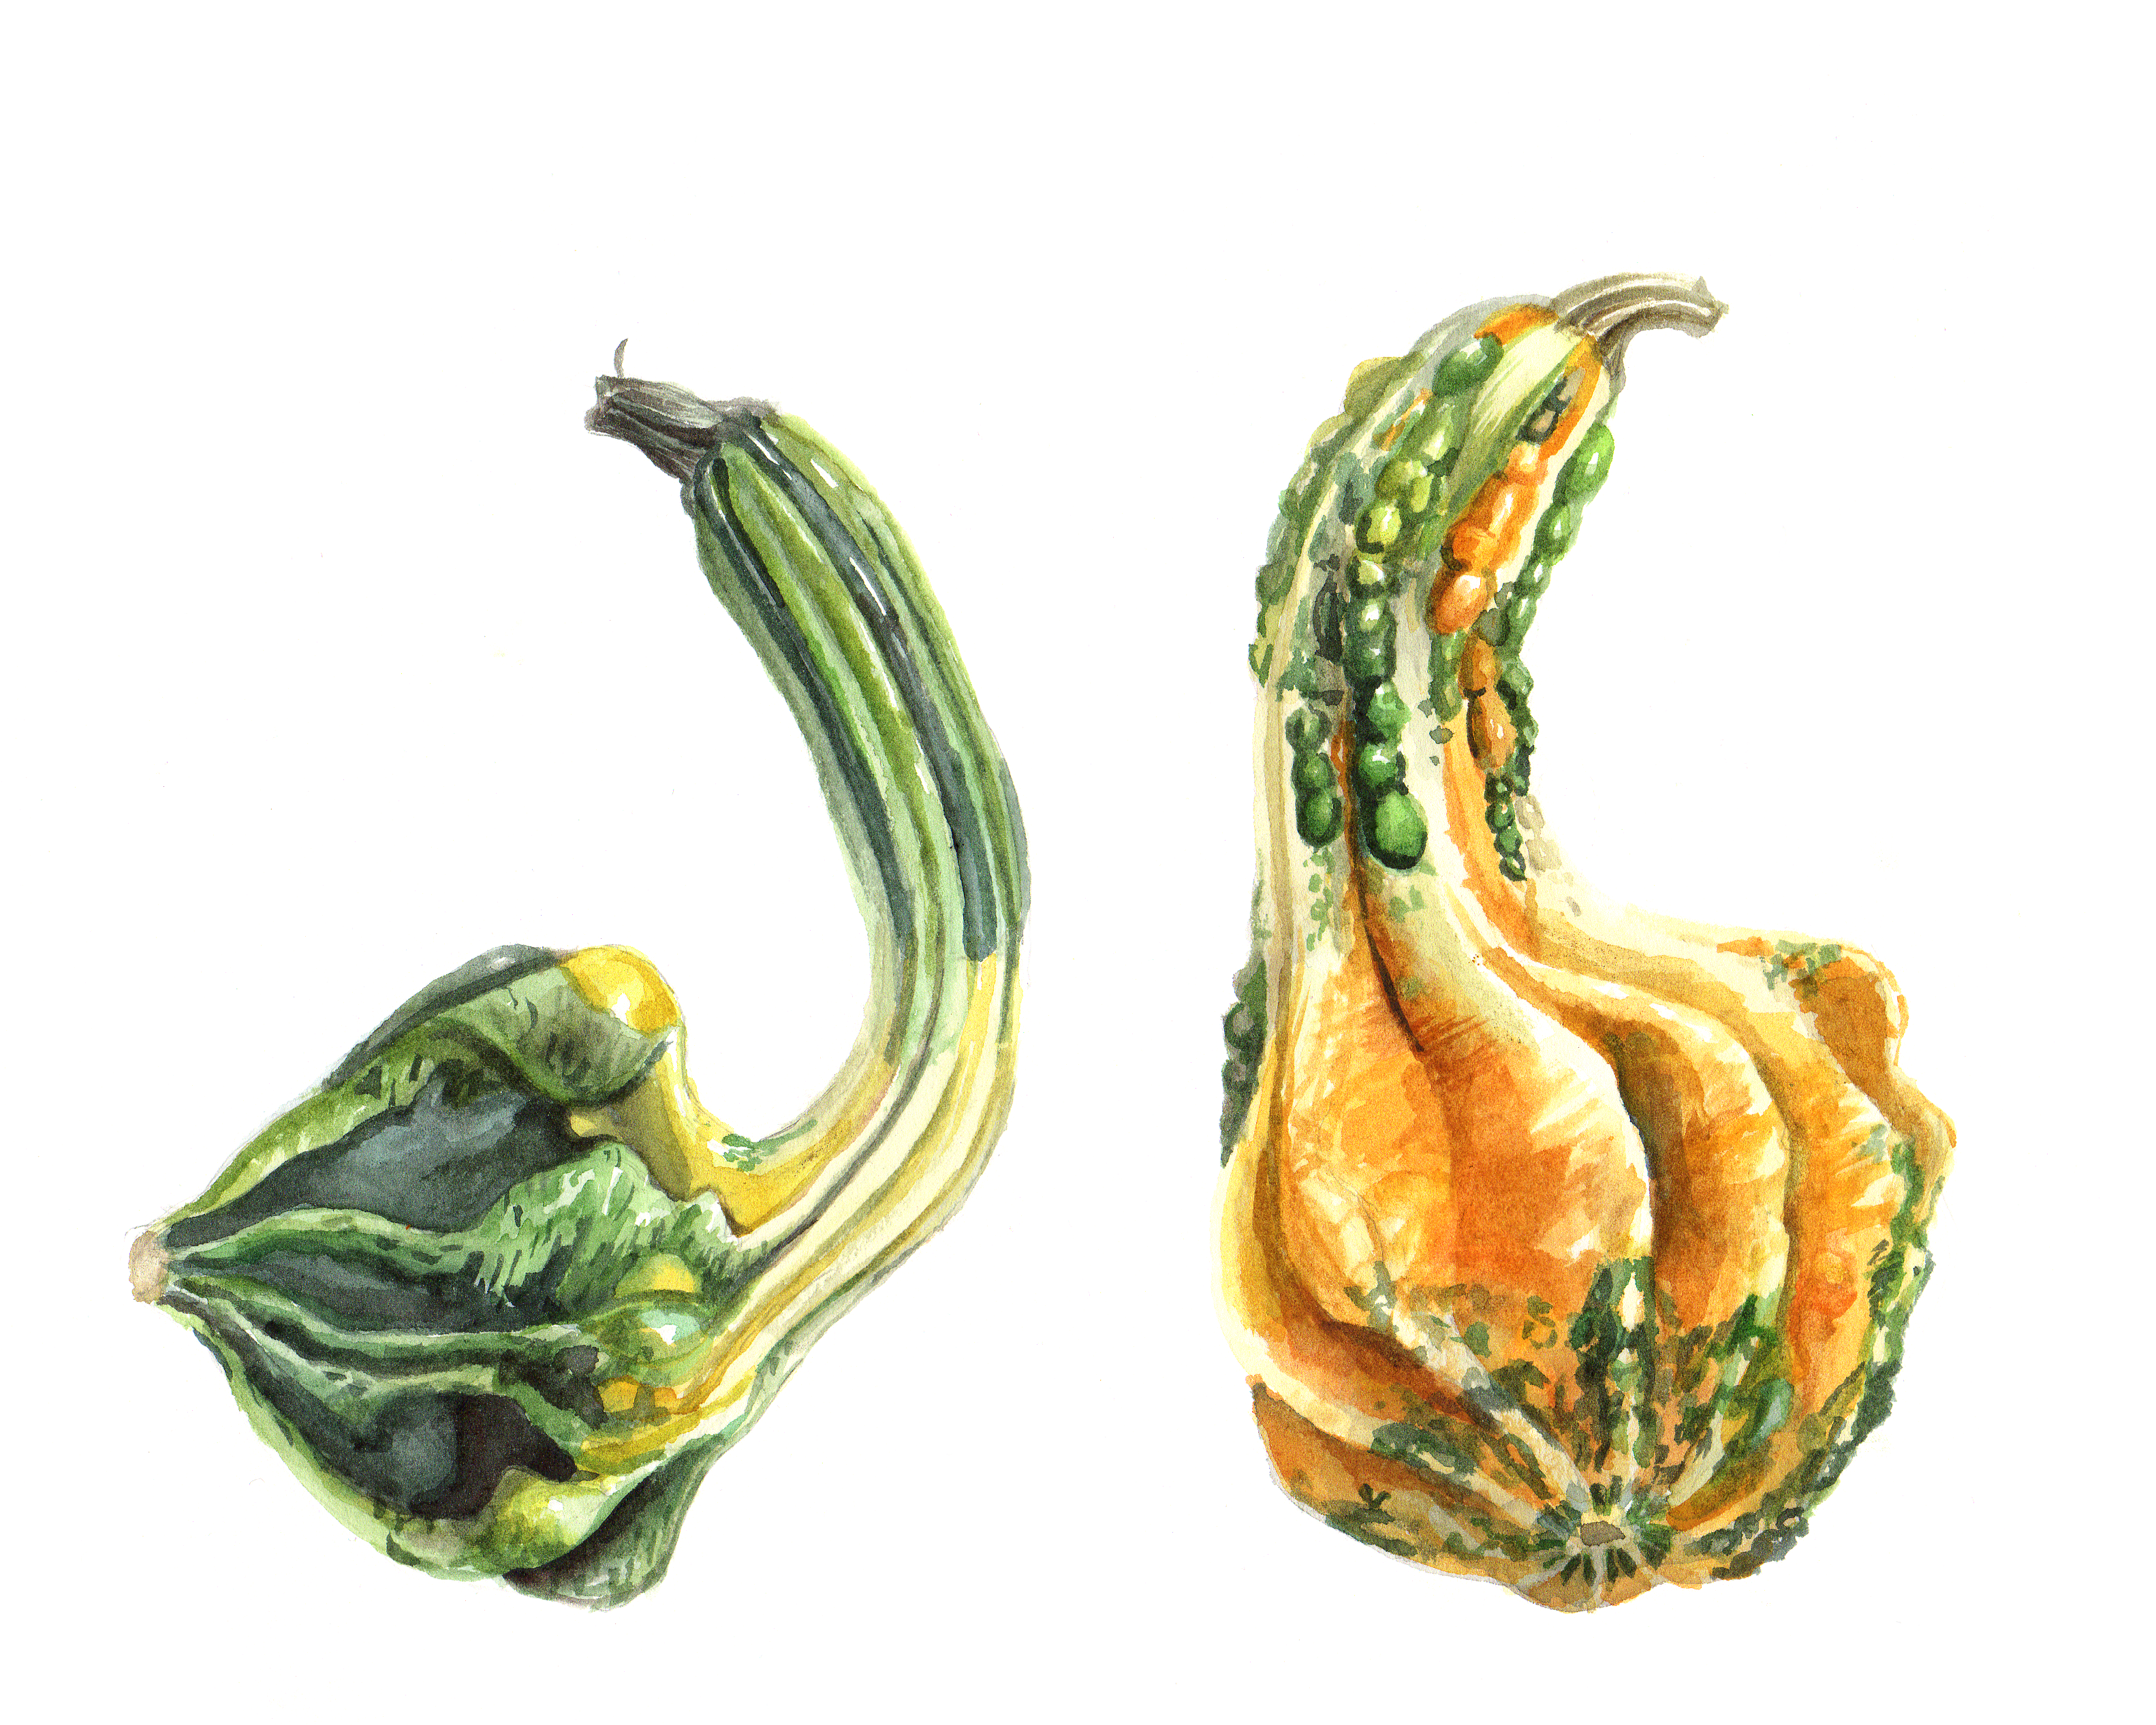 Watercolour painting of two decorative gourds